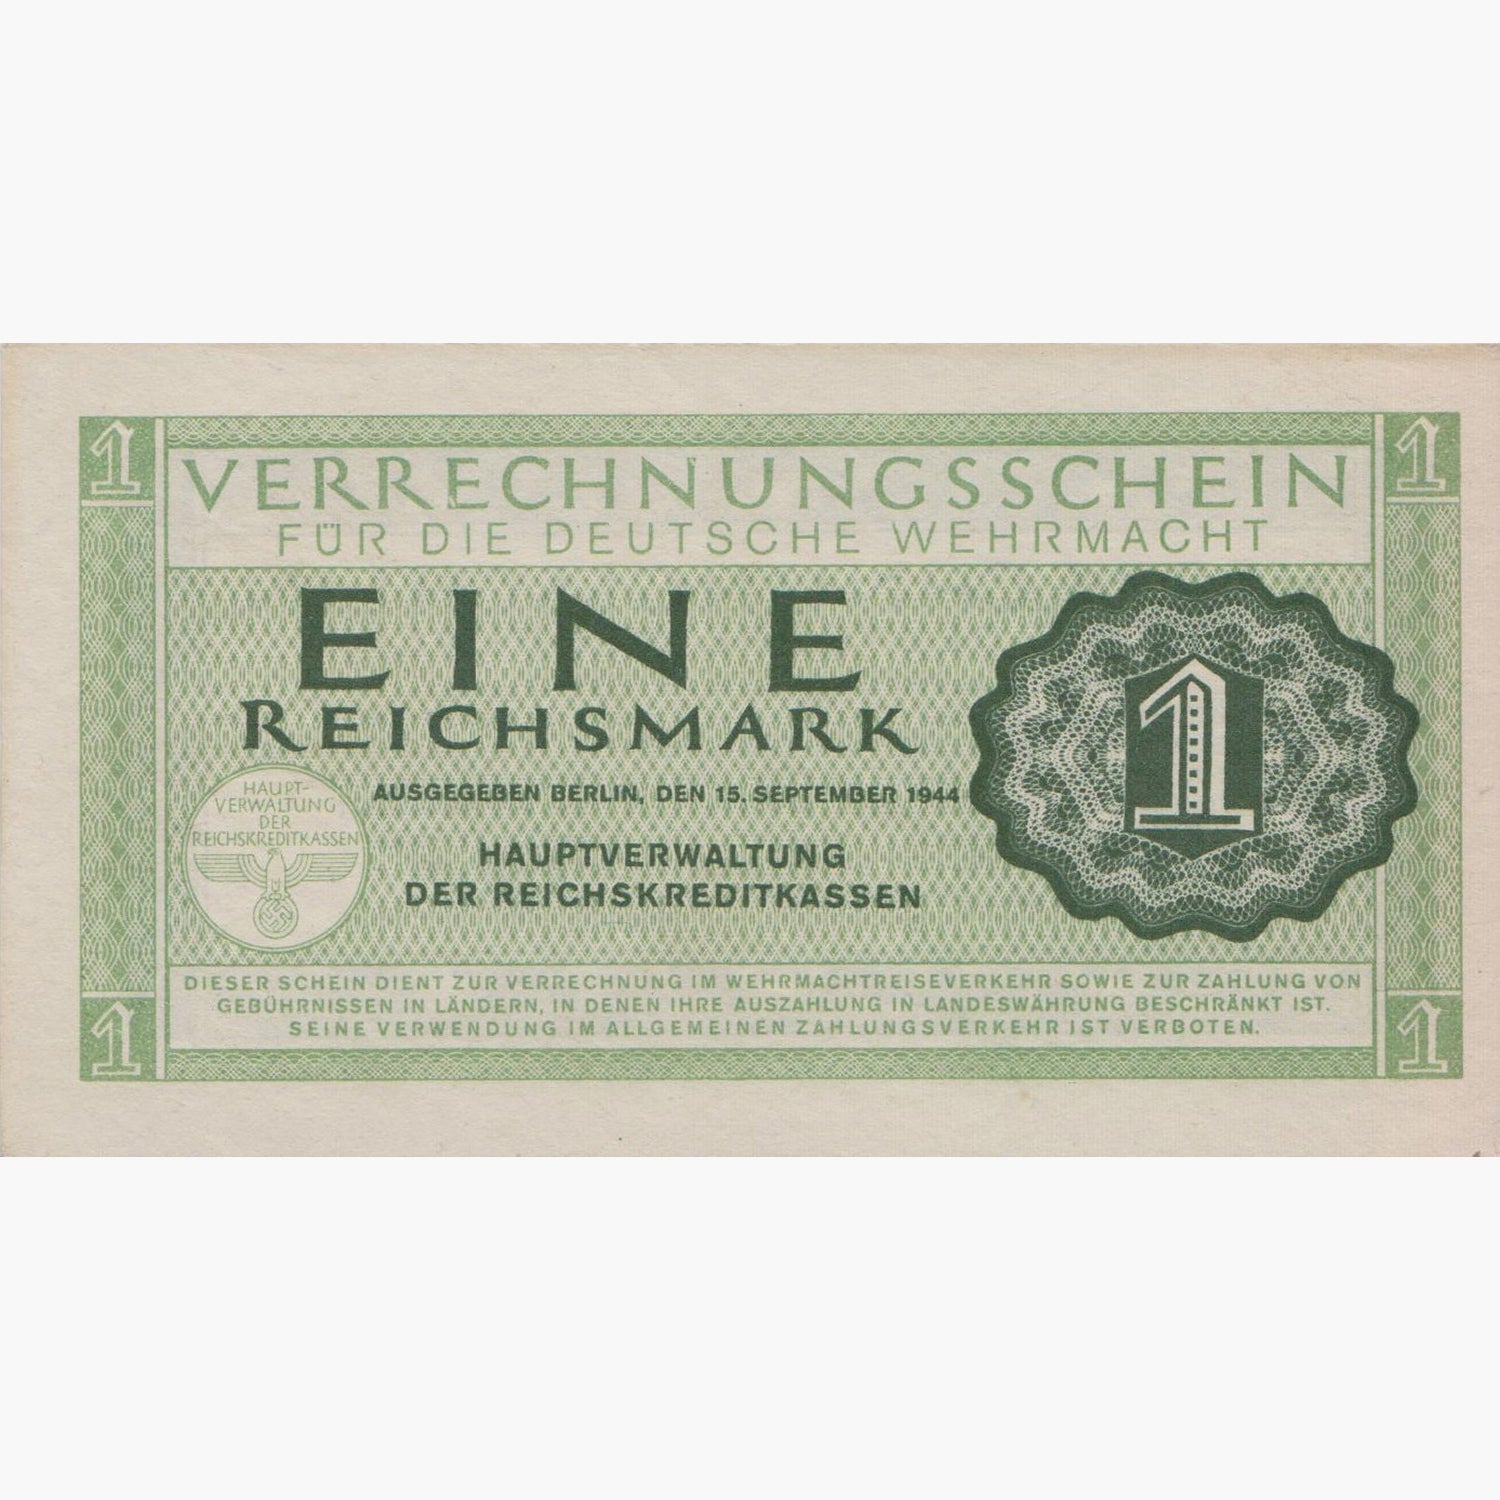 WWII Banknote Collection